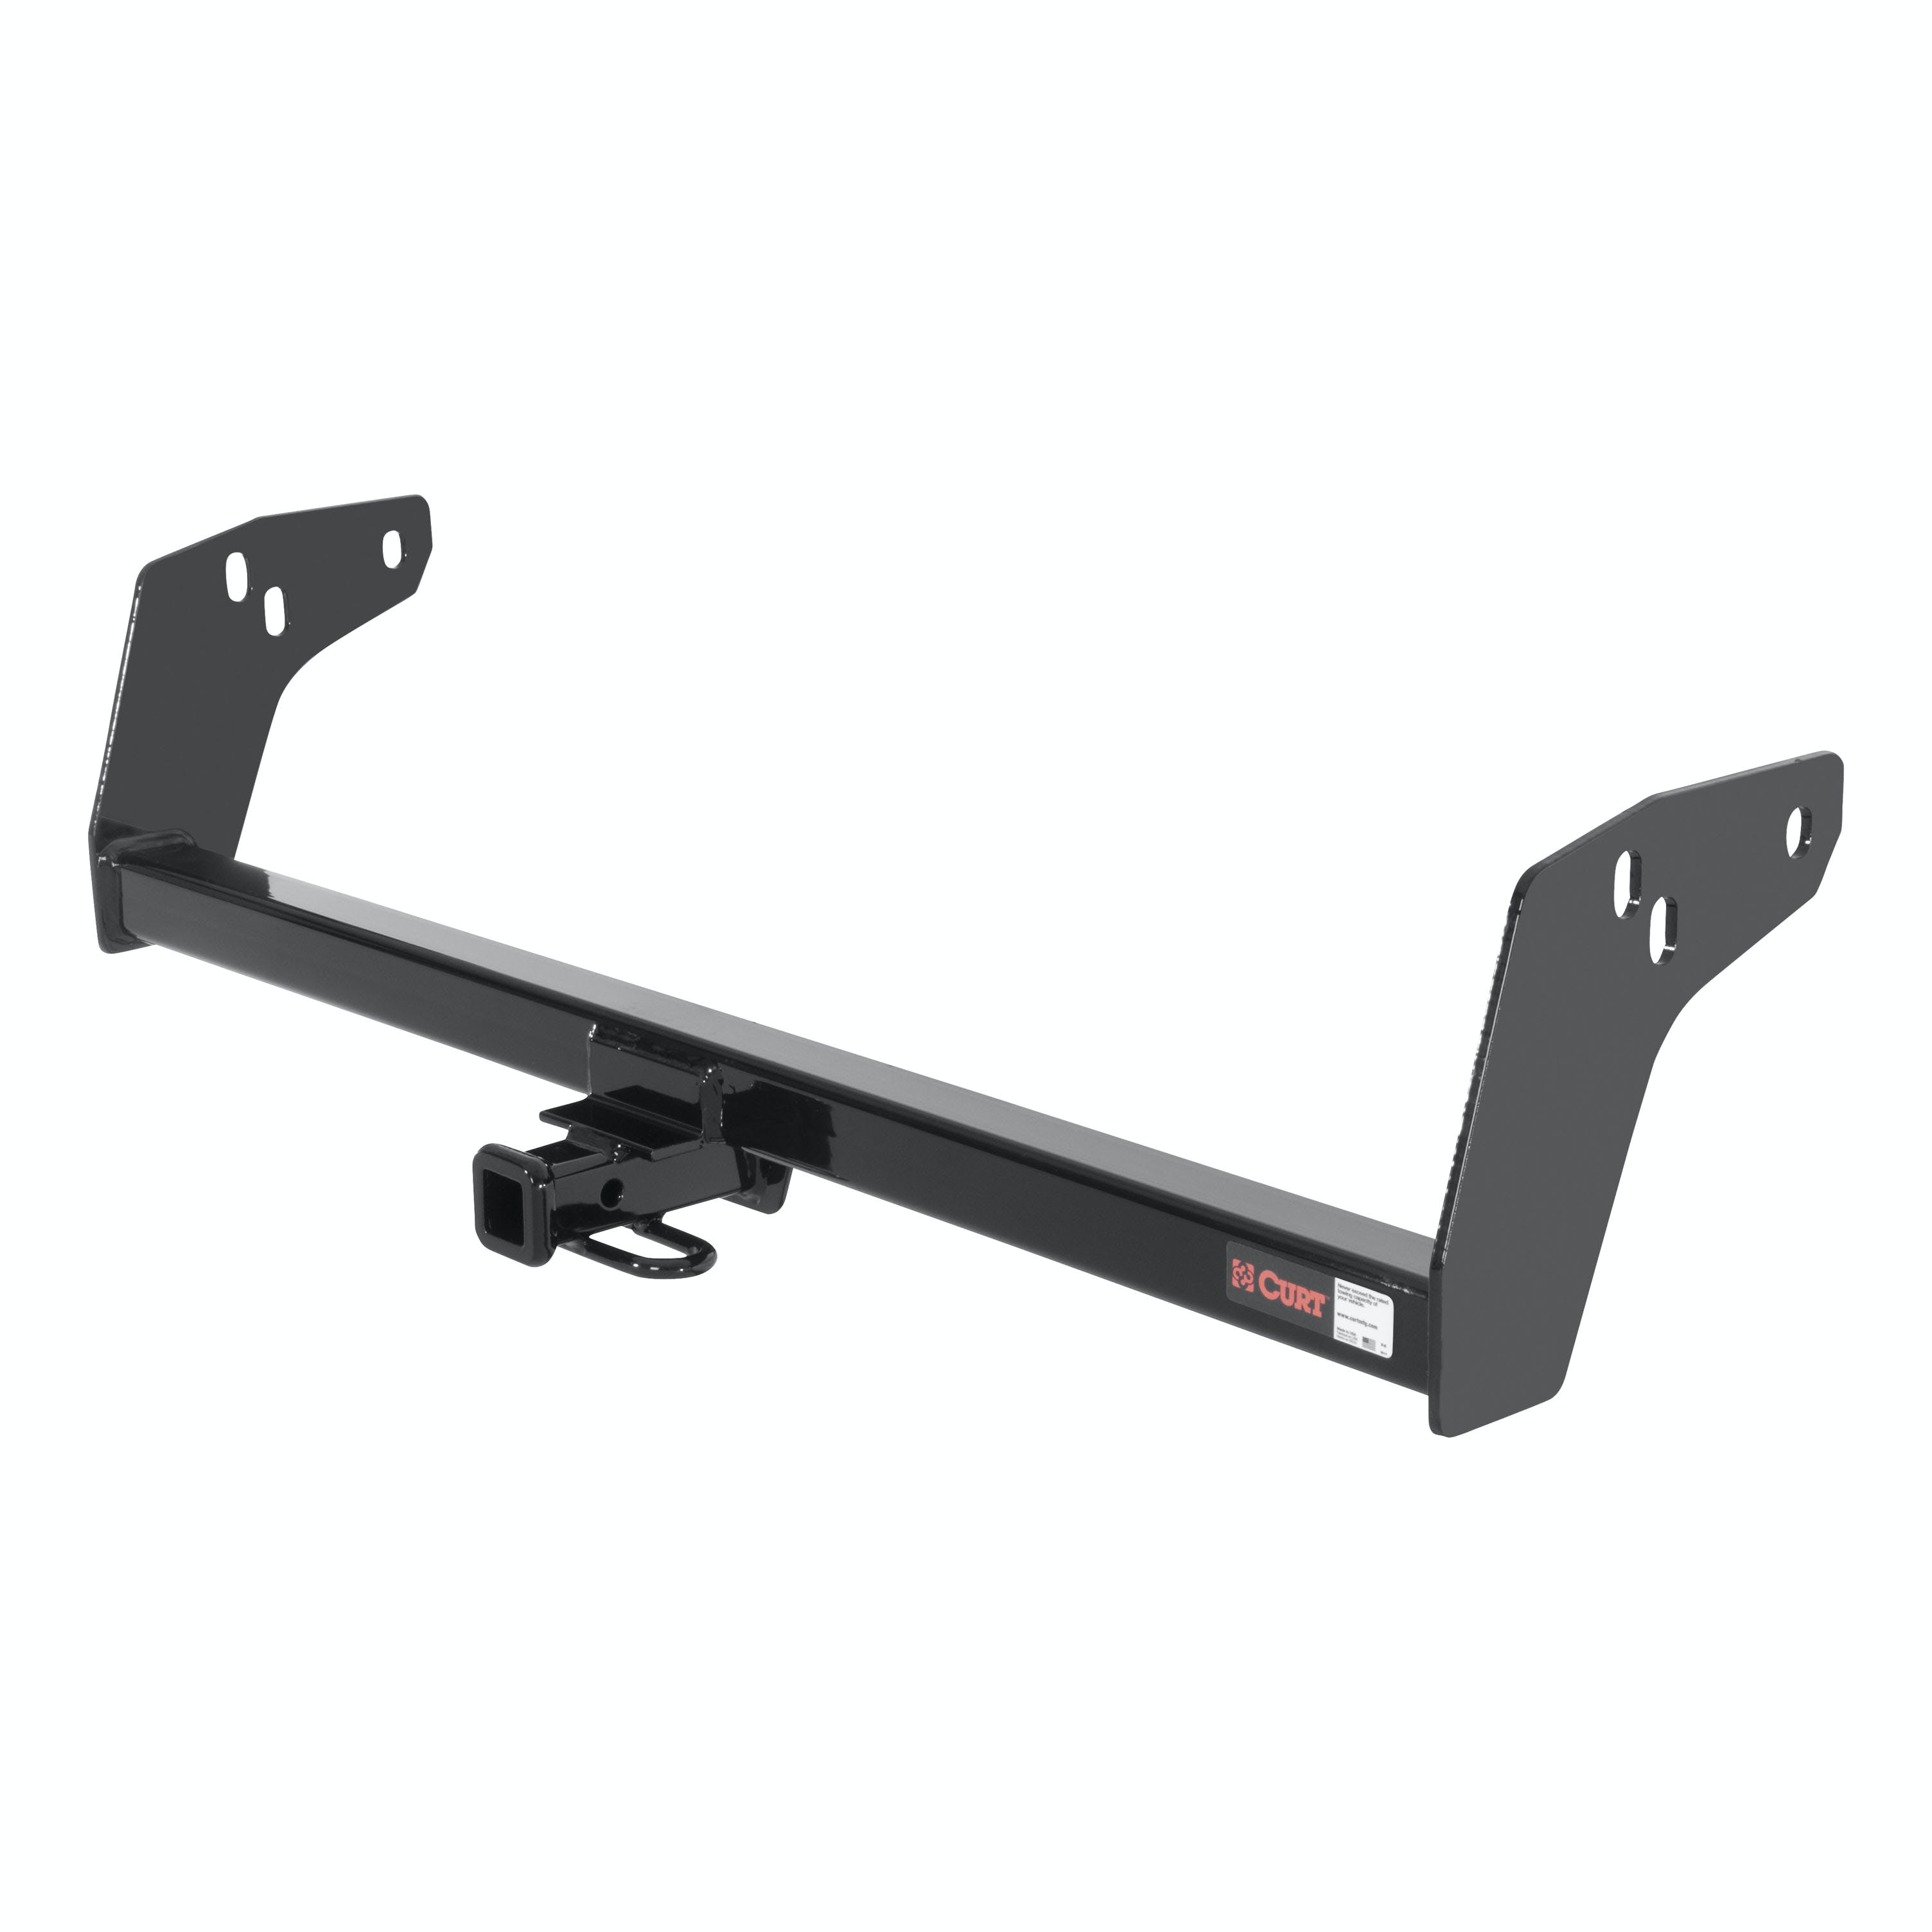 CURT 12011 Class 2 Trailer Hitch, 1-1/4 Receiver, Select Chevrolet S10, GMC S15, Sonoma